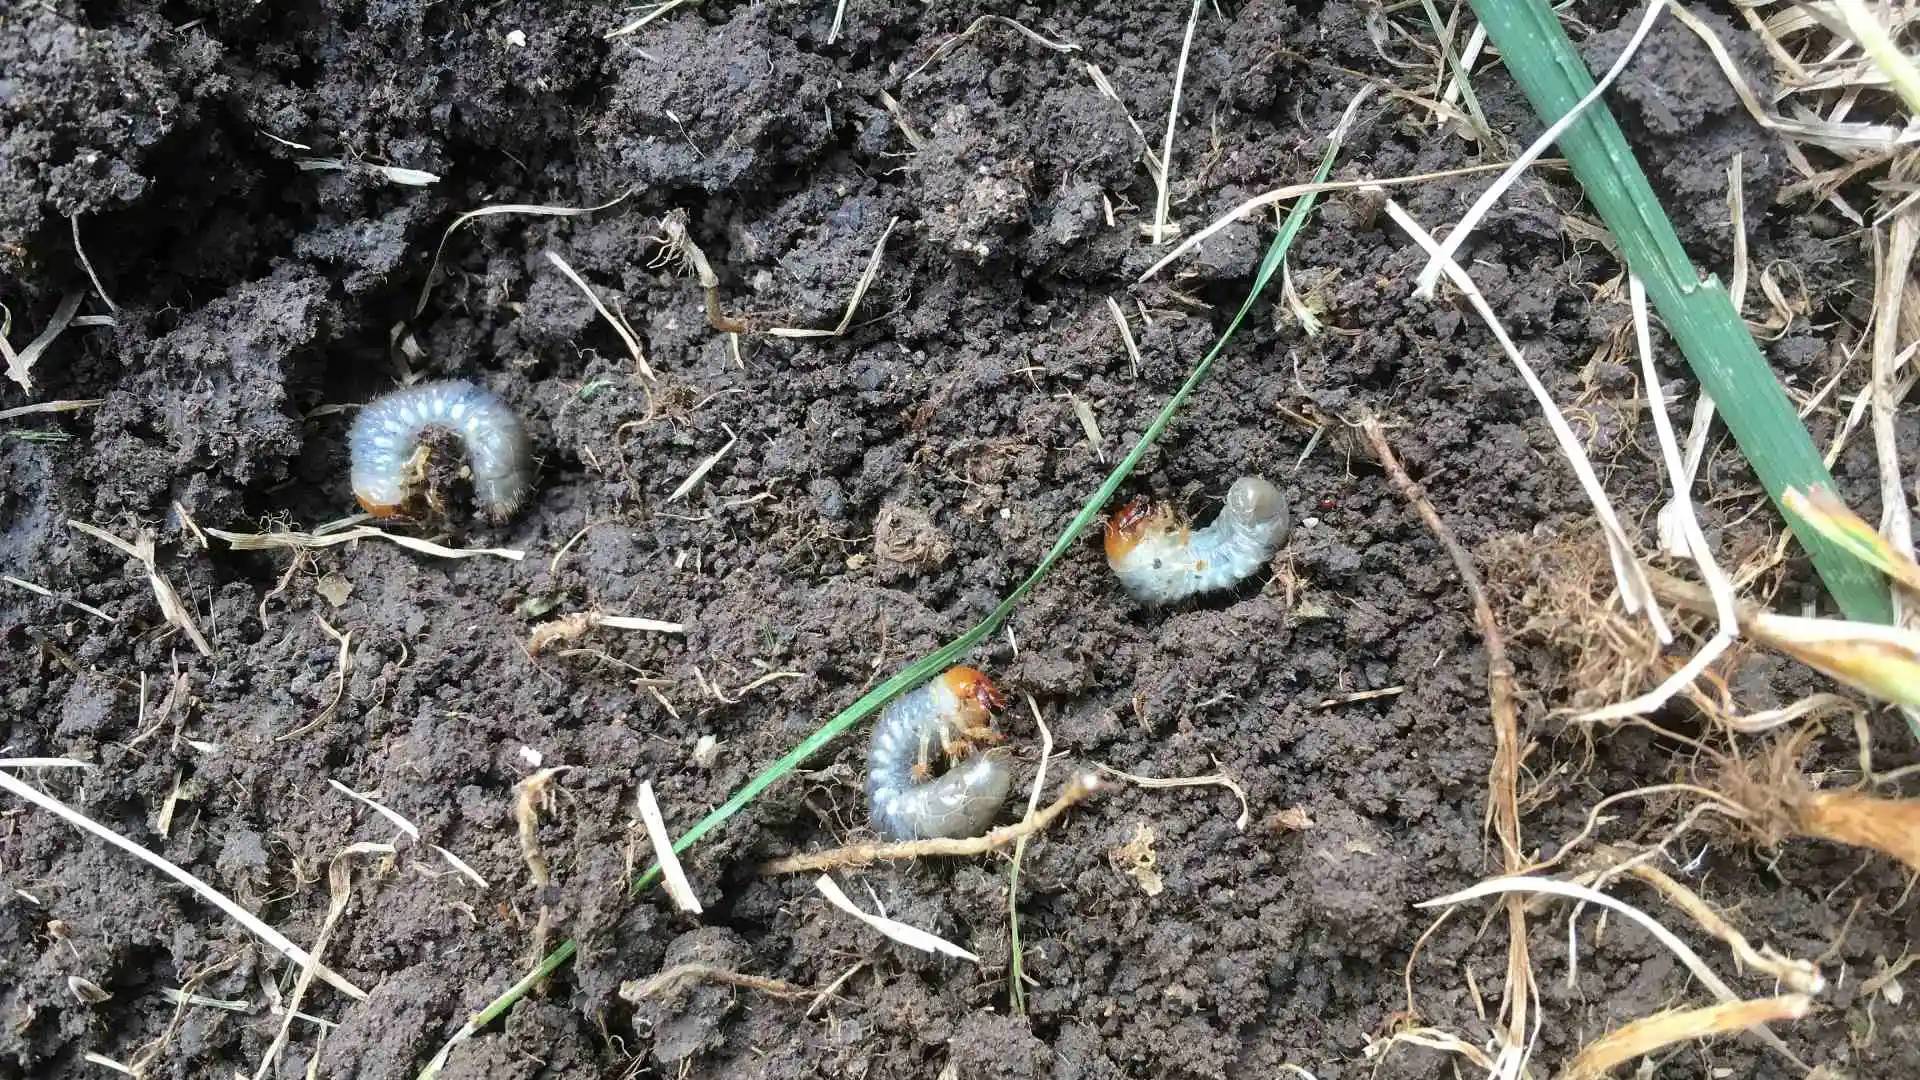 Grubs curled in soil in Frisco, TX.